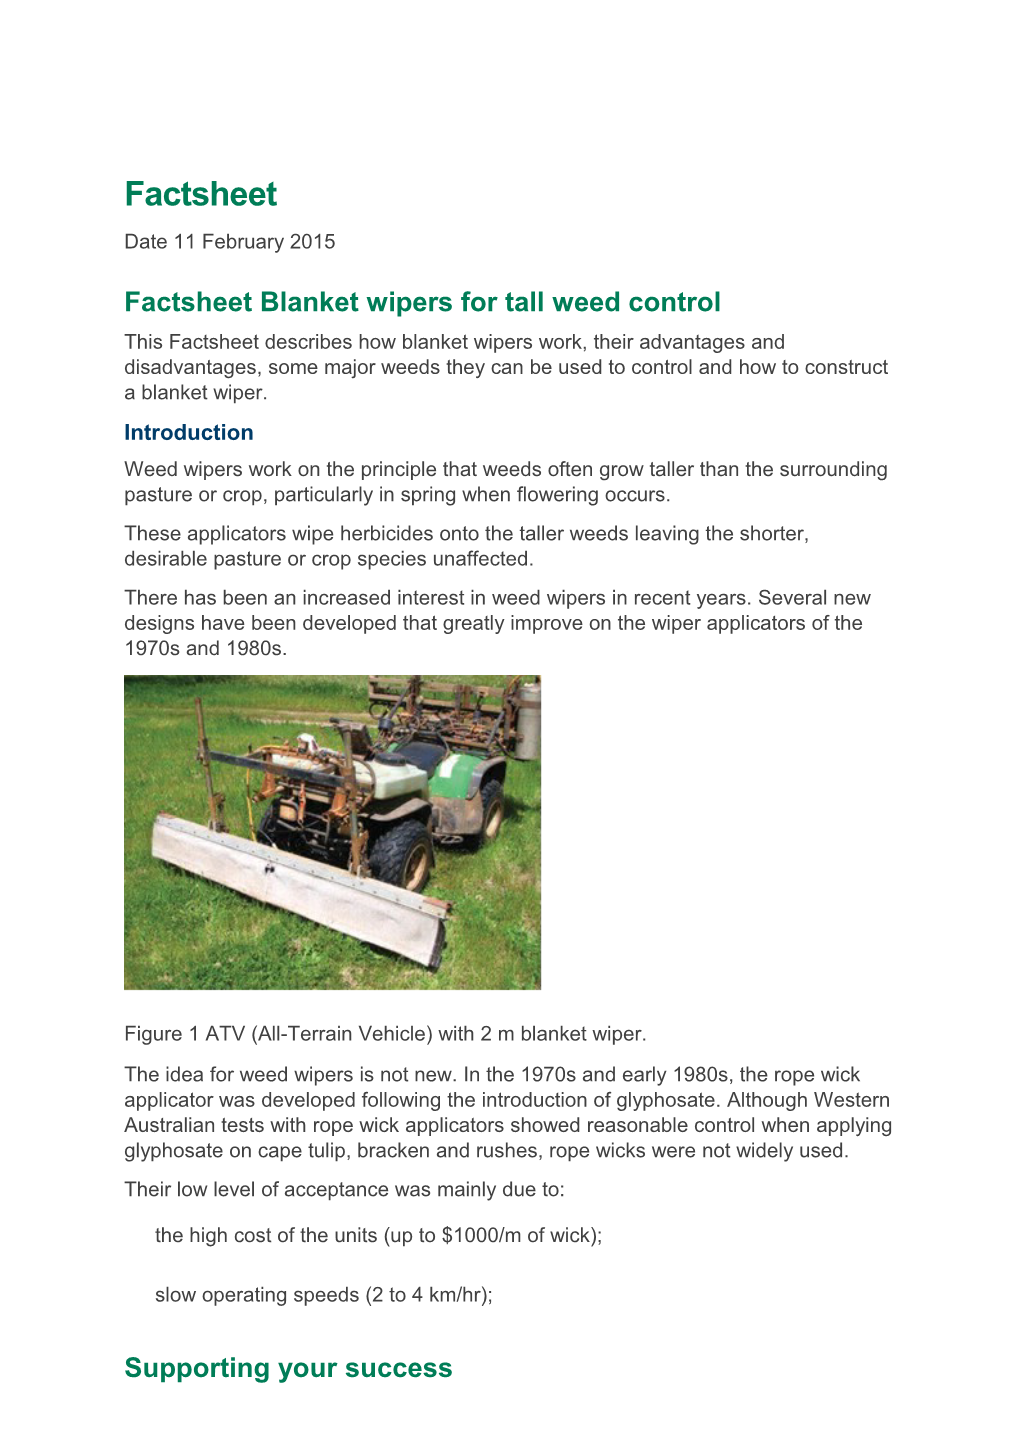 Factsheet Blanket Wipers for Tall Weed Control